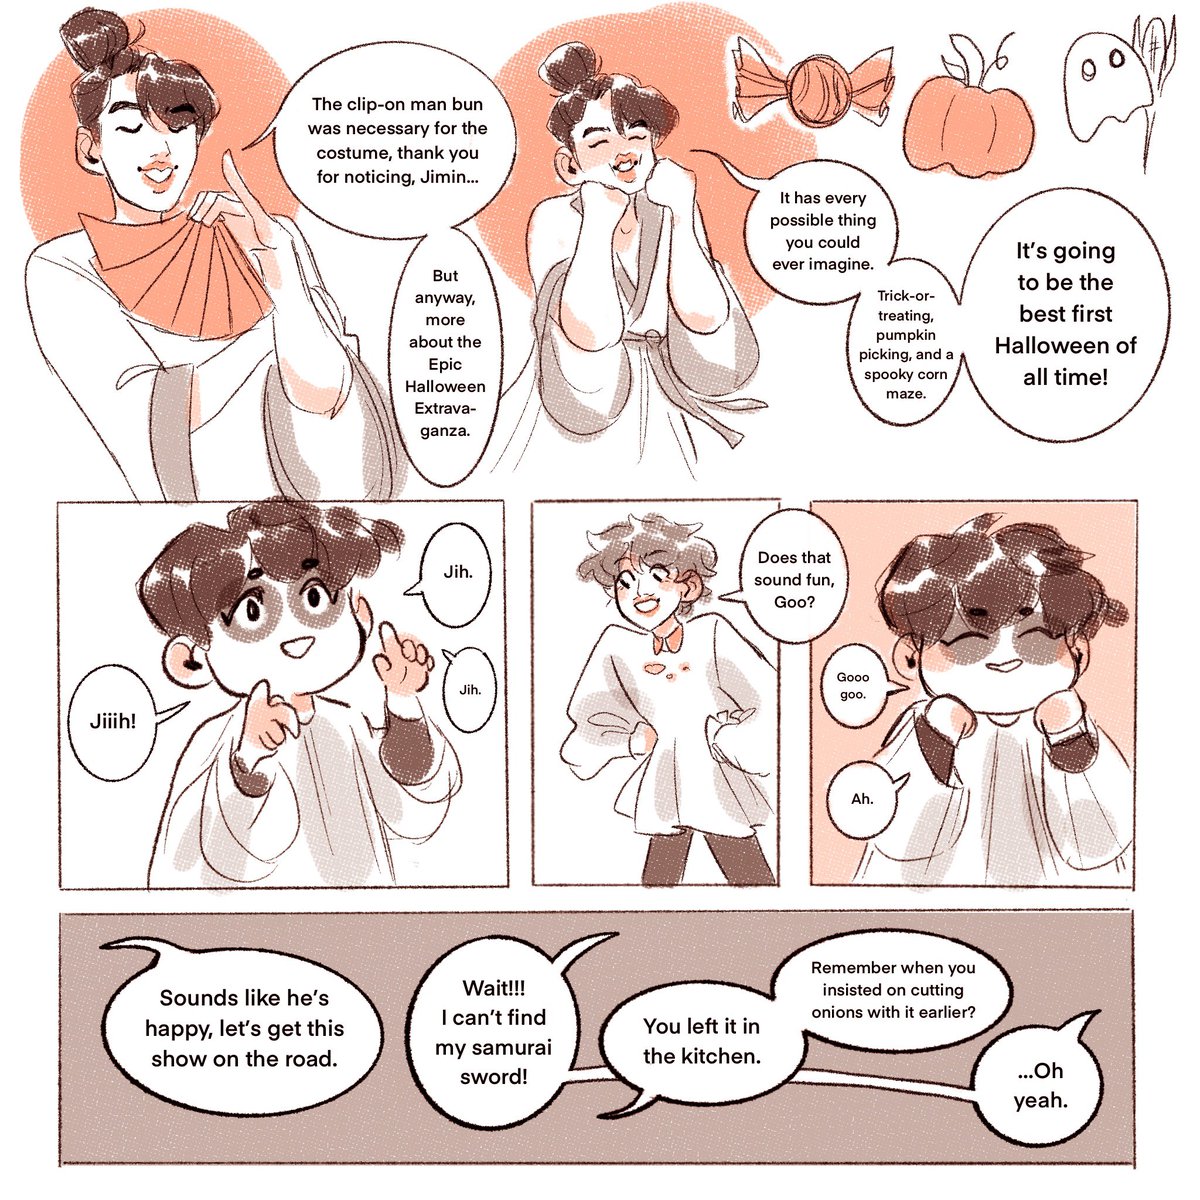 ✨Candy Corn✨ A Spooky Namgi Dads Comic 🧡💛🤍 [Part 3/8] 